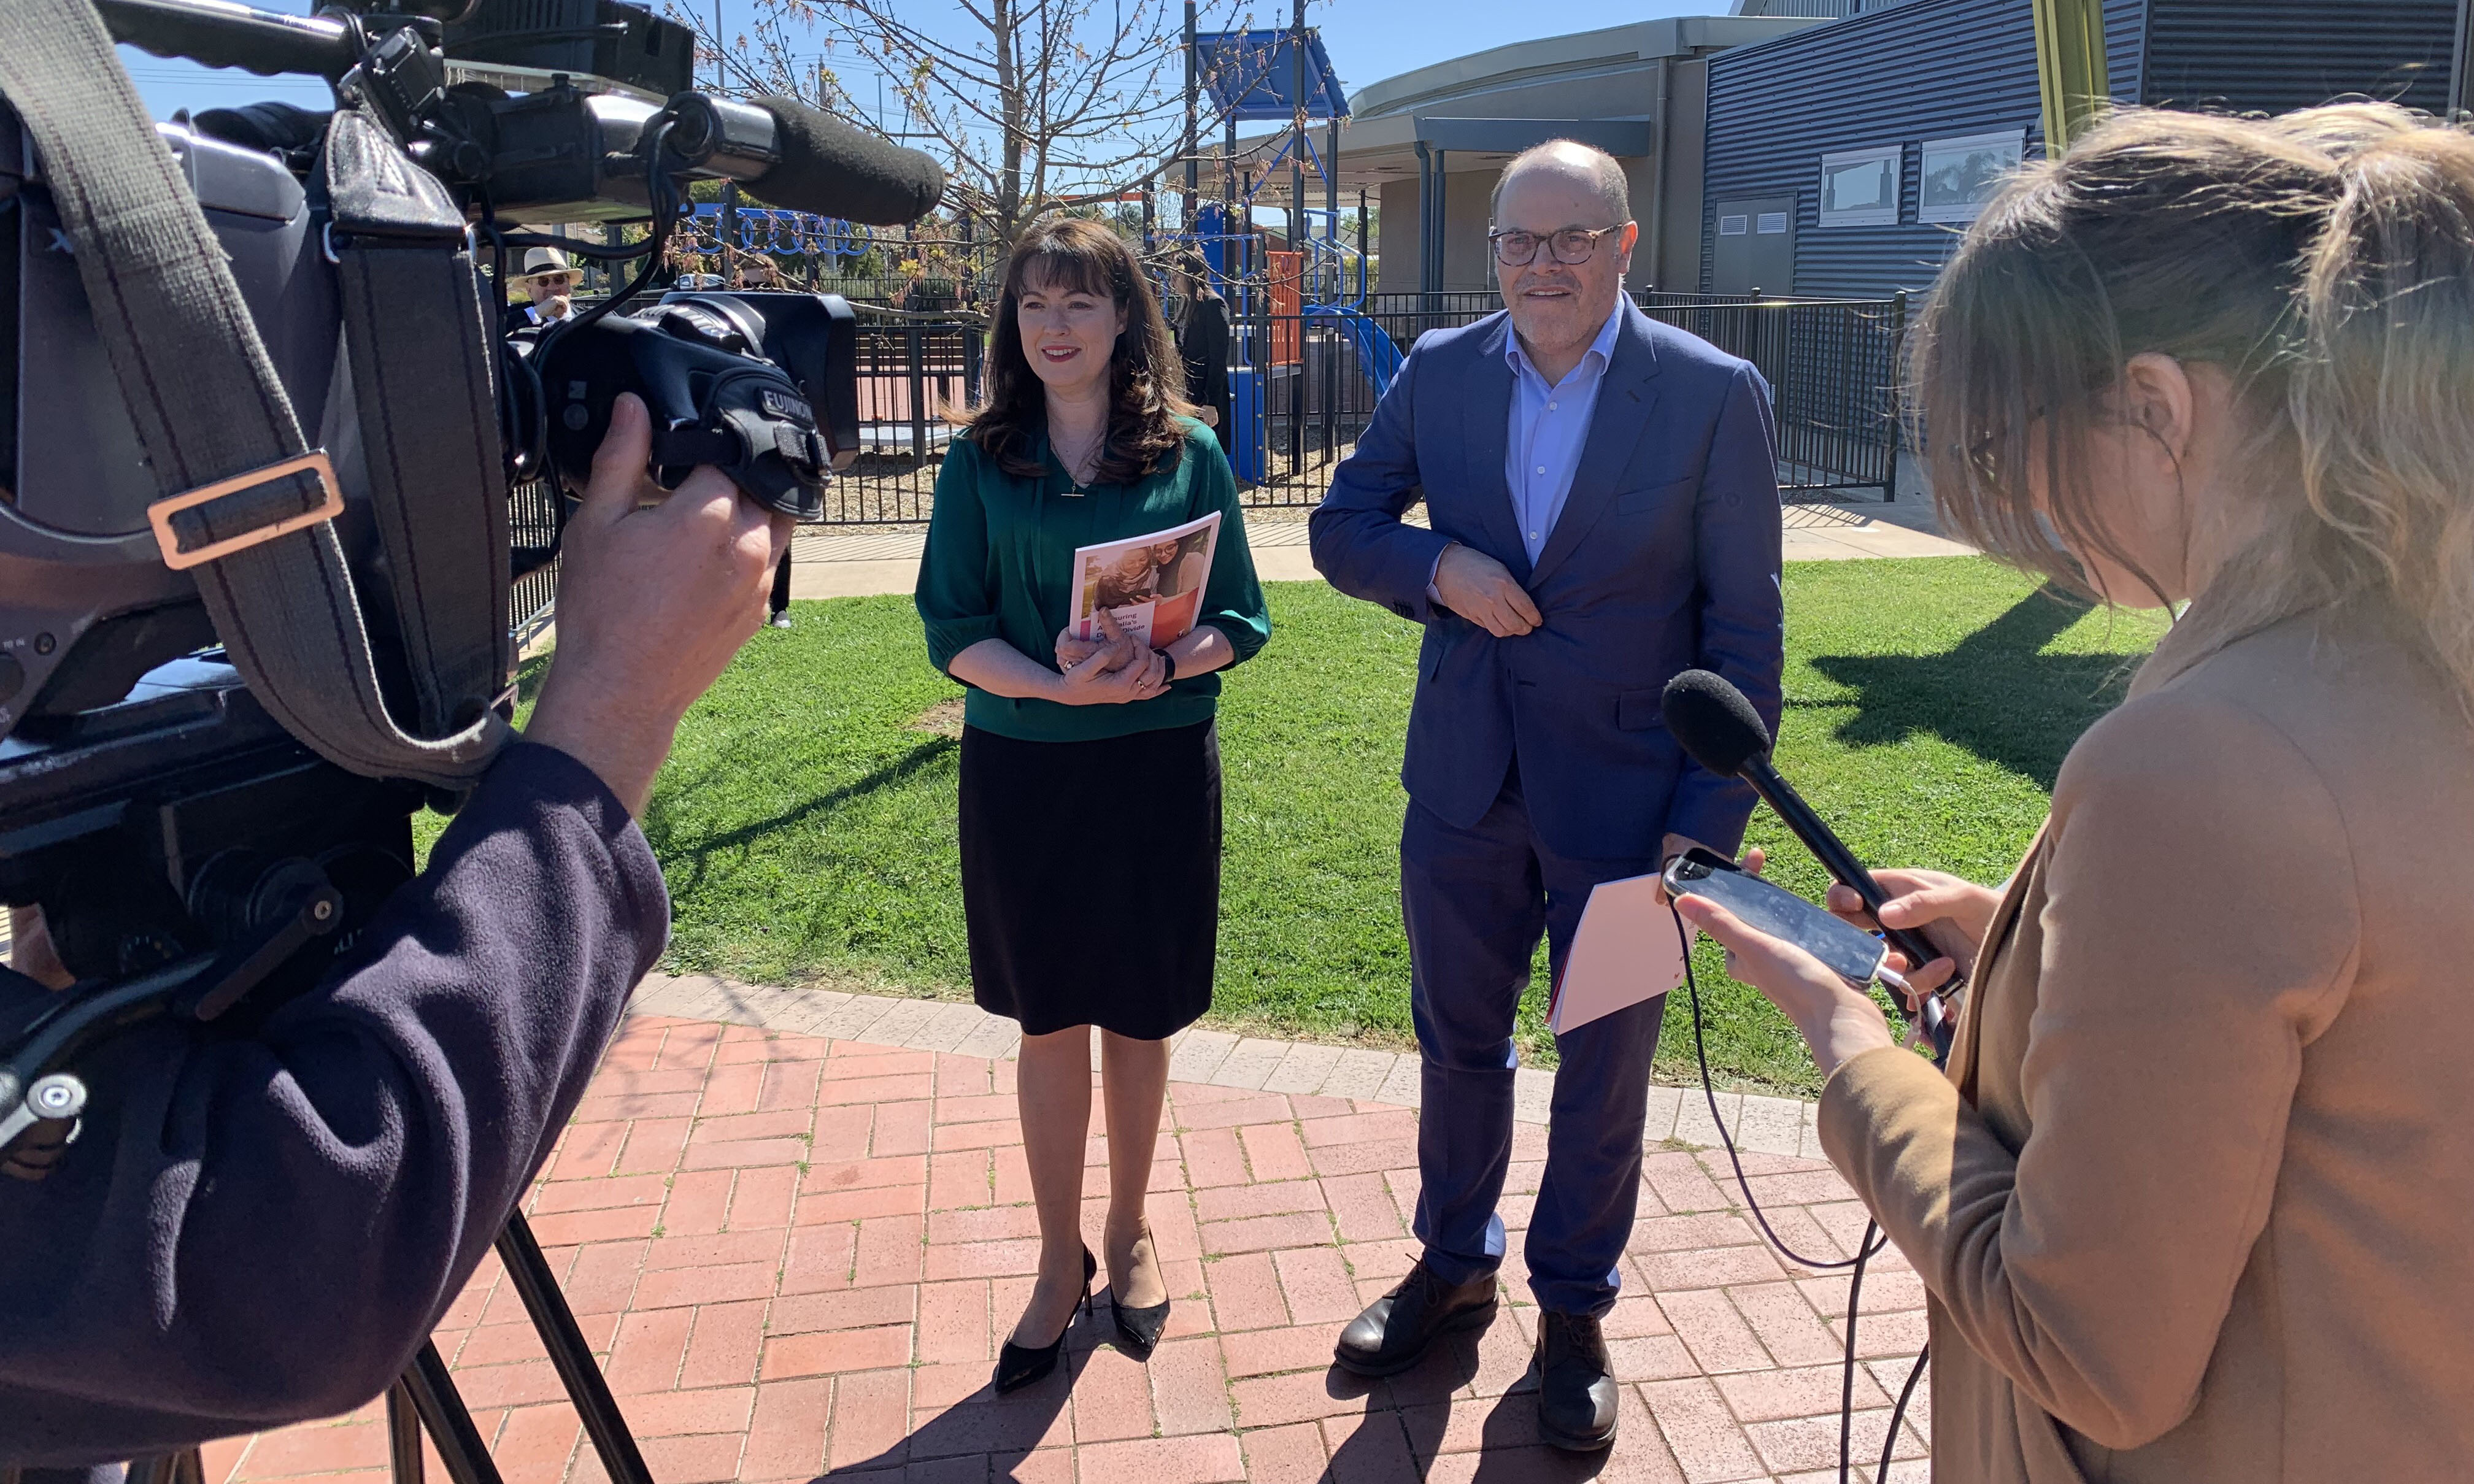 Telstra's Carmel Mulhern and RMIT's Professor Julian Thomas from the Digital Ethnography Research Centre at the launch of the report in Shepparton.